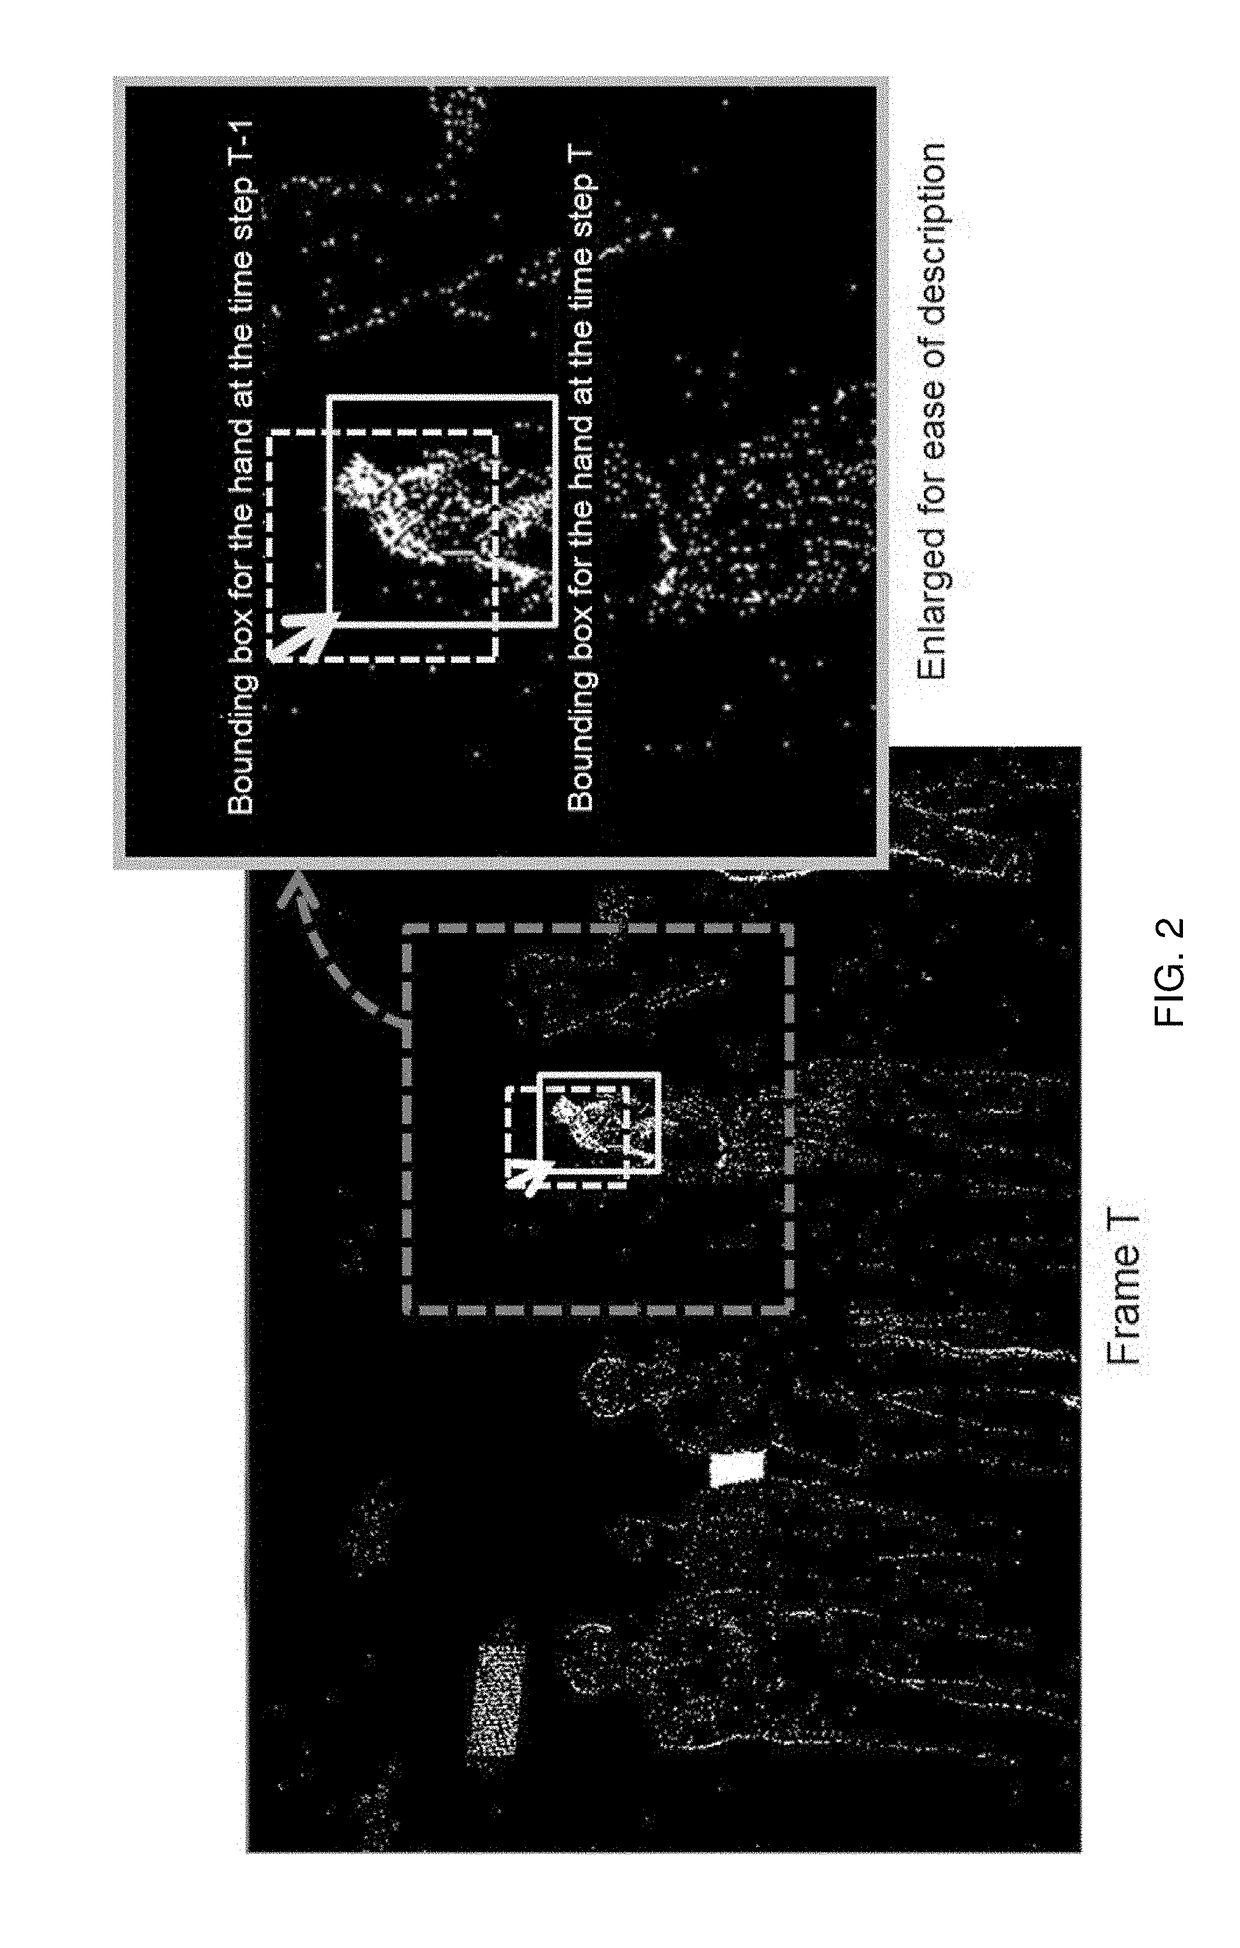 Object detection method and apparatus based on dynamic vision sensor